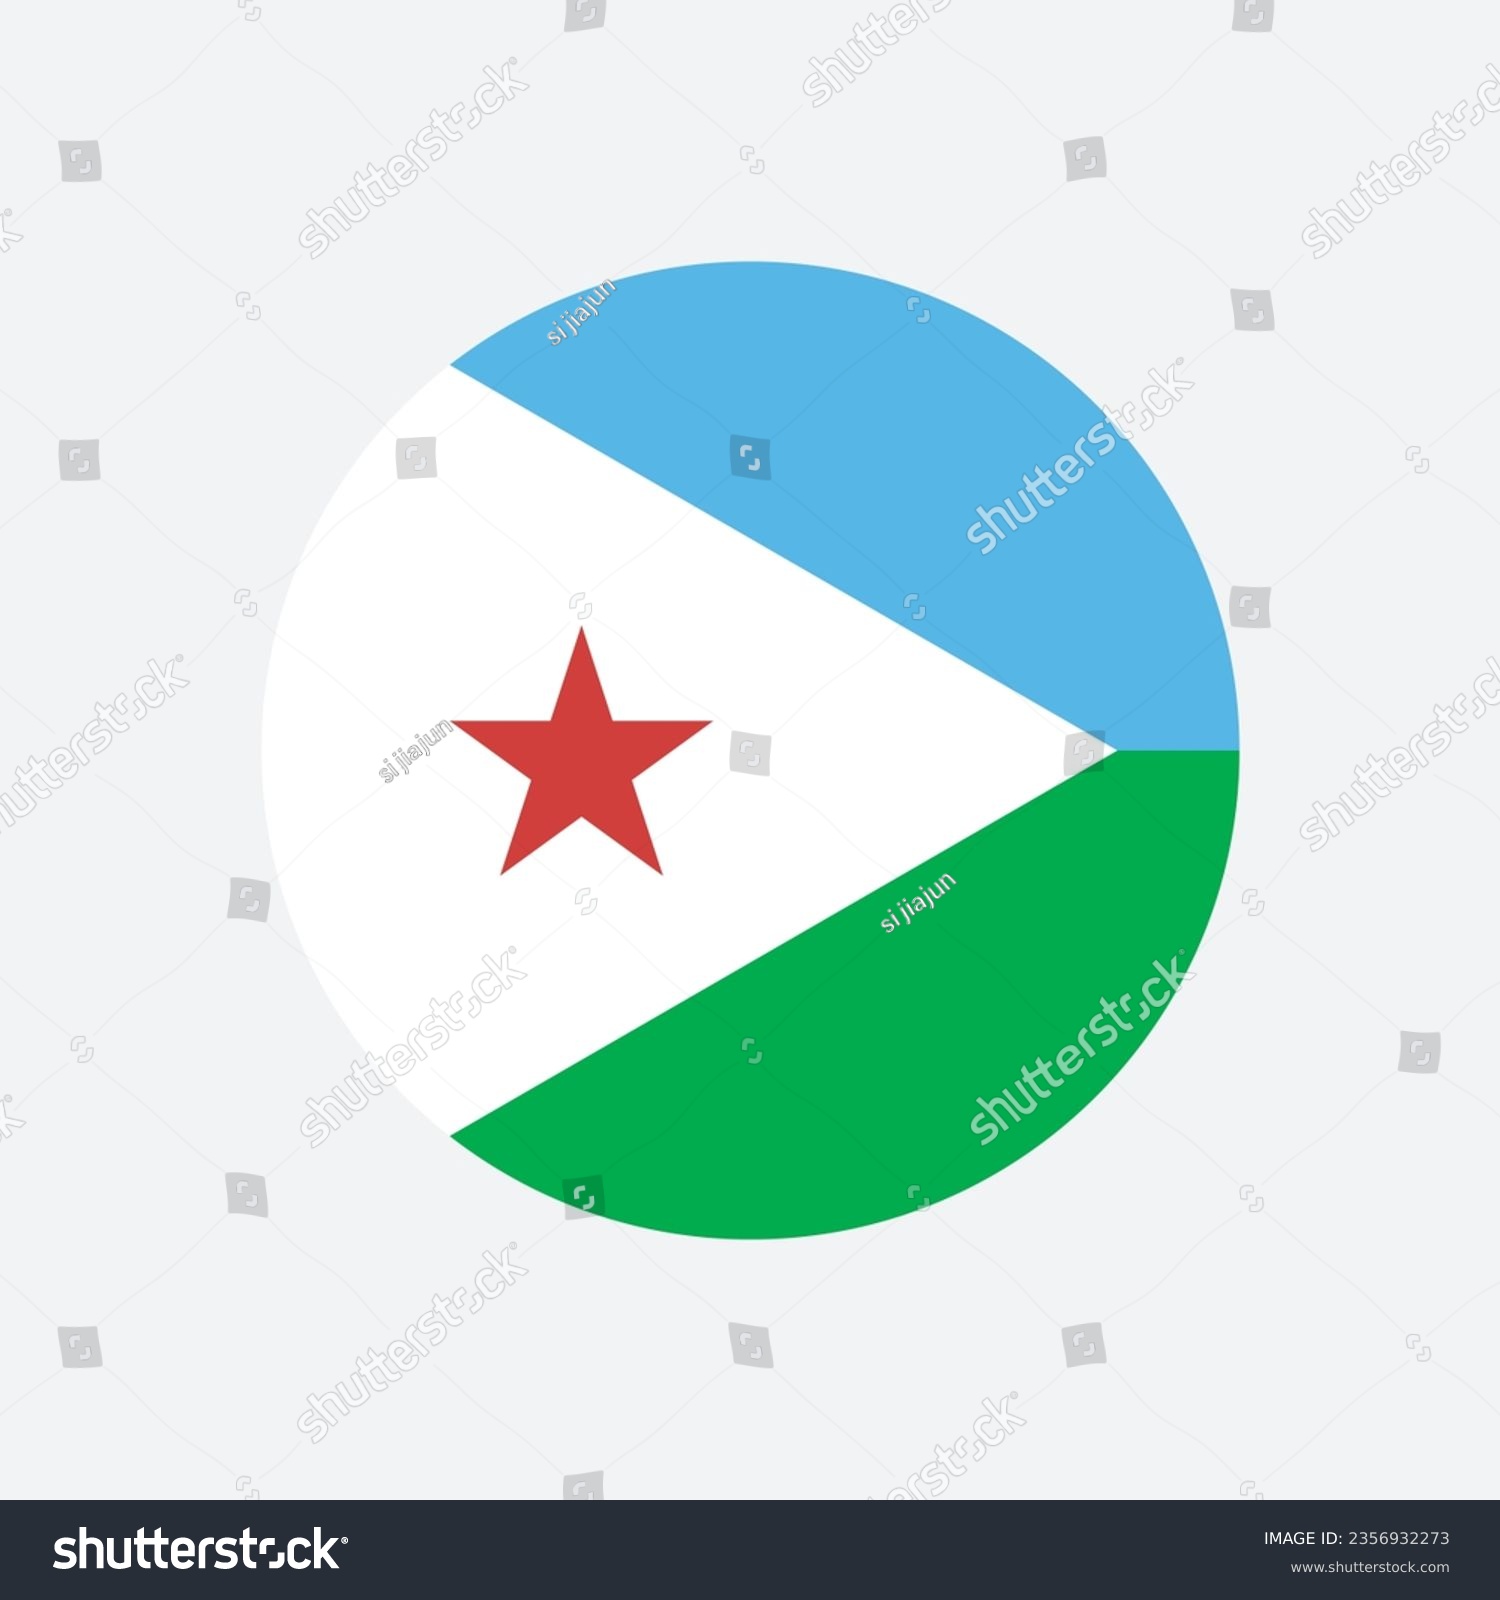 SVG of Flag of Djibouti. Button flag icon. Standard color. Round button icon. The circle icon. Computer illustration. Digital illustration. Vector illustration. svg